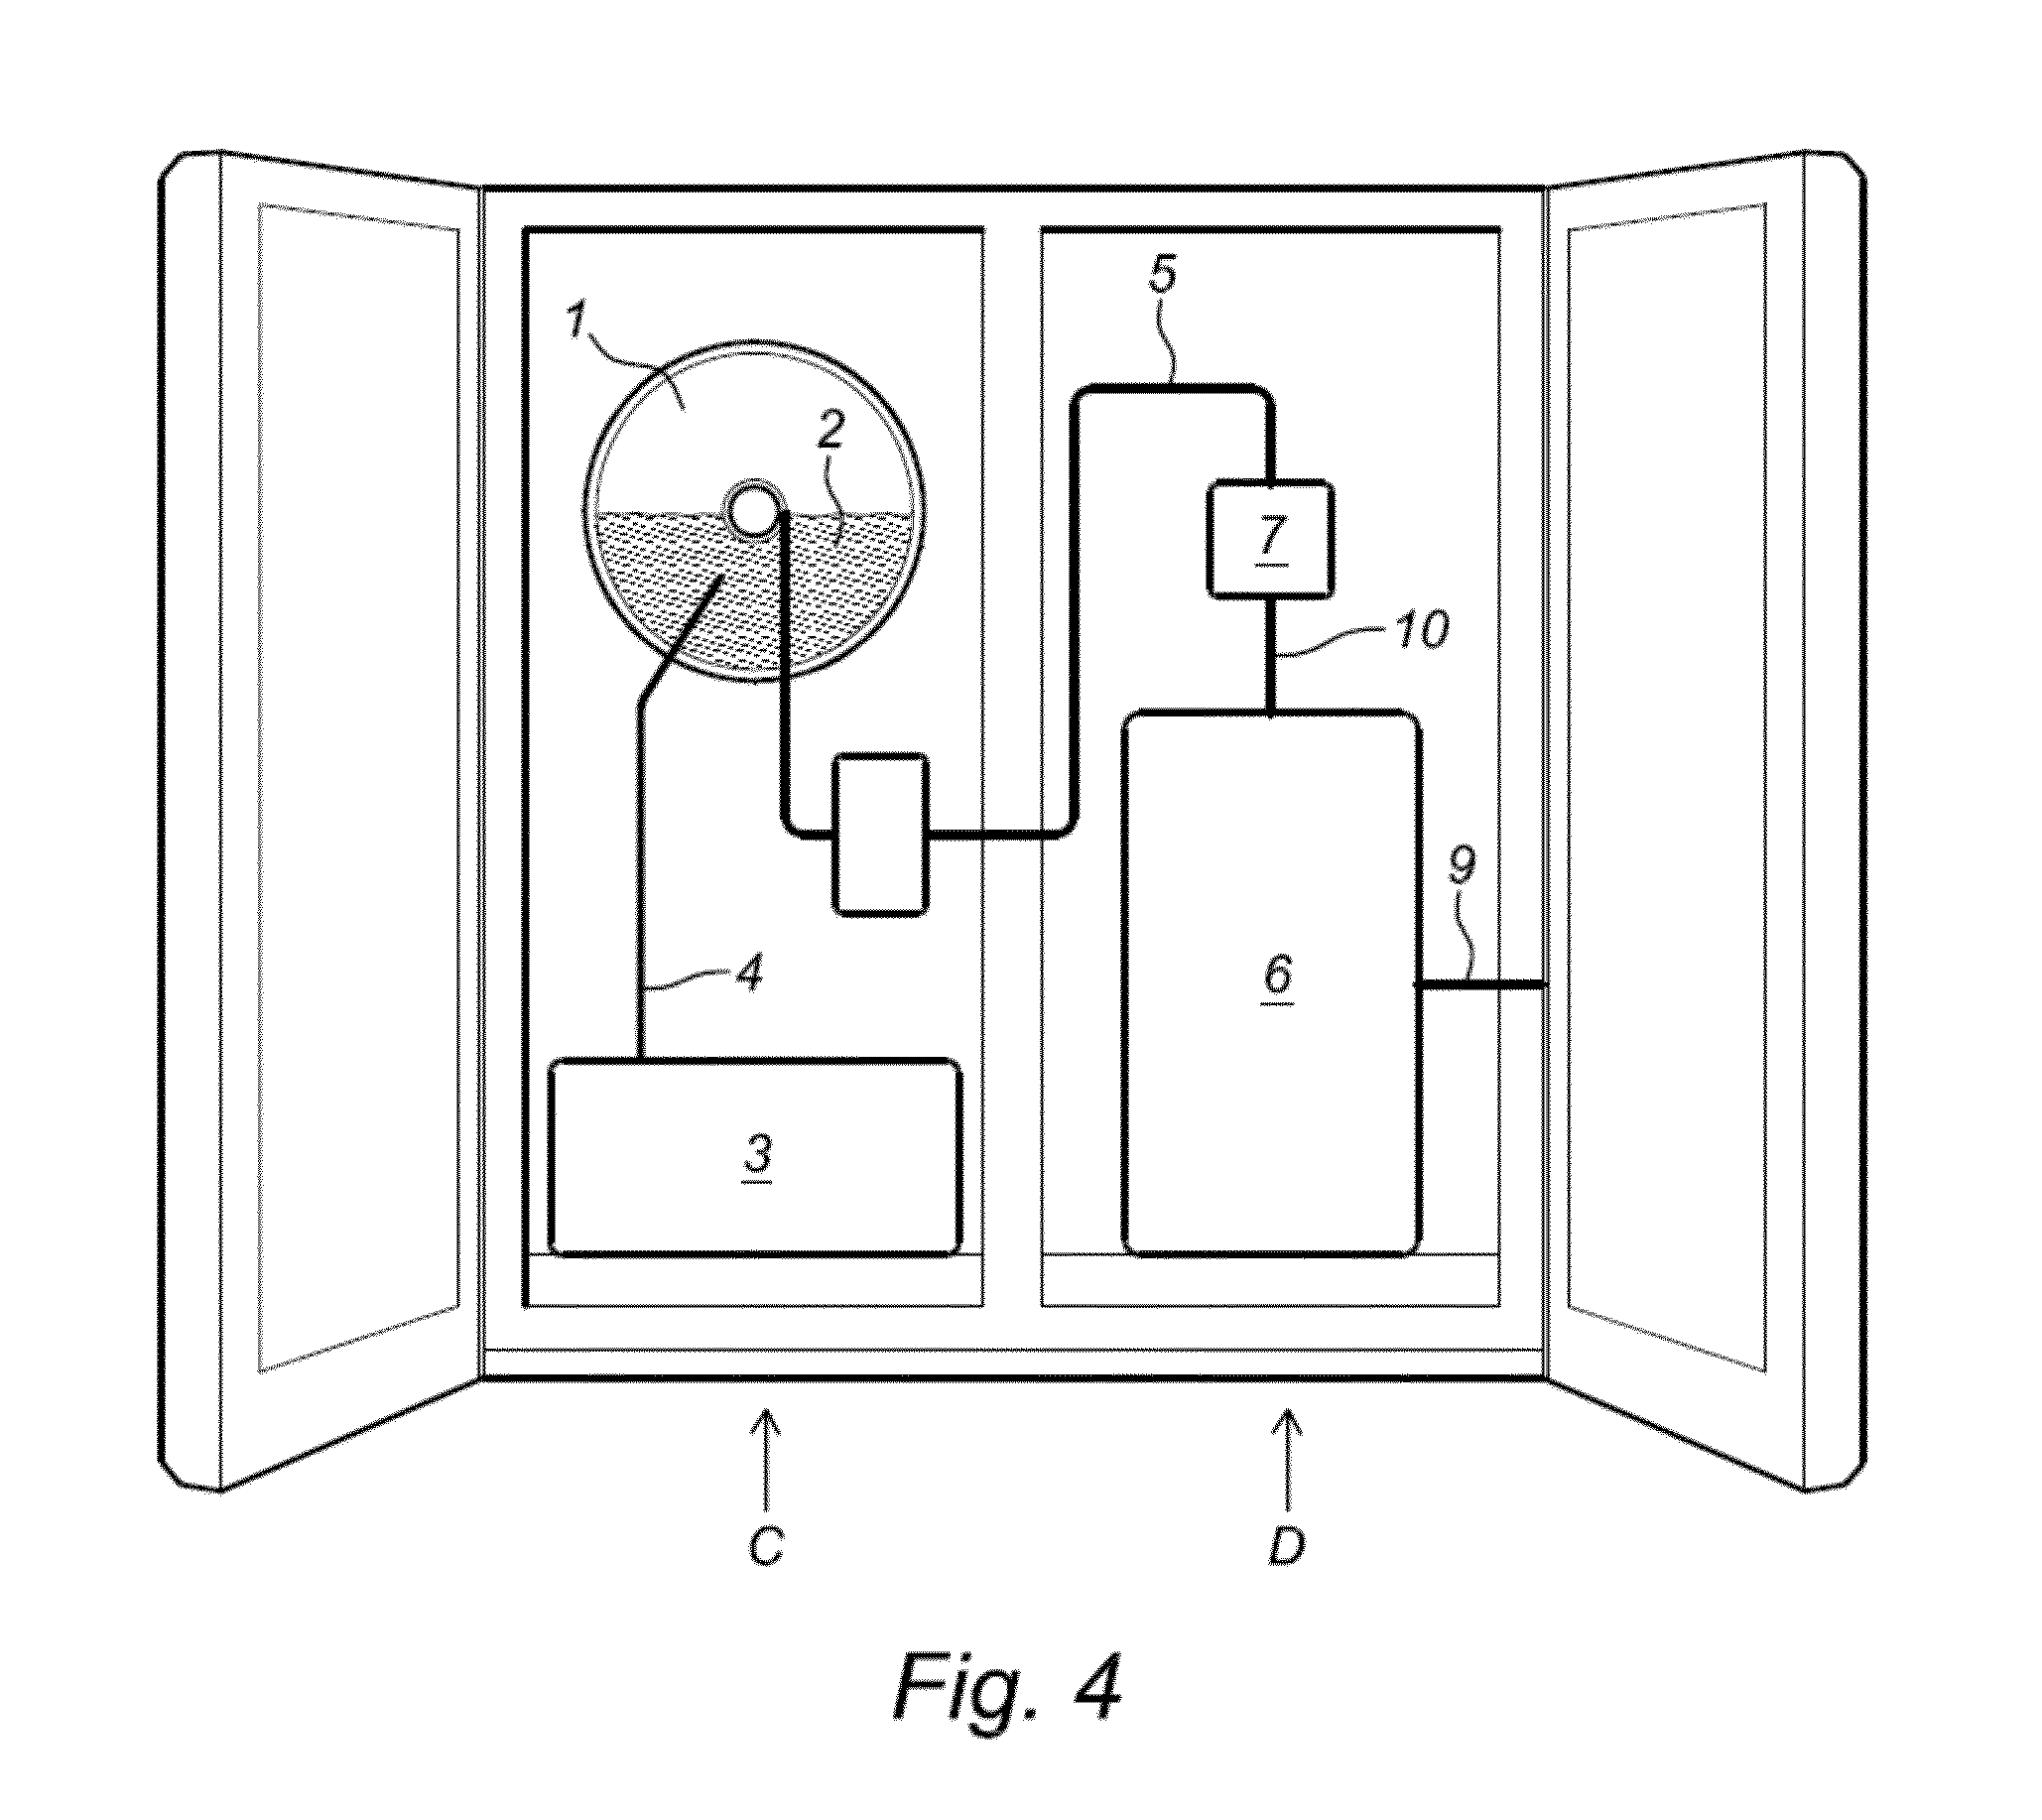 System, apparatus and method for biomolecules production